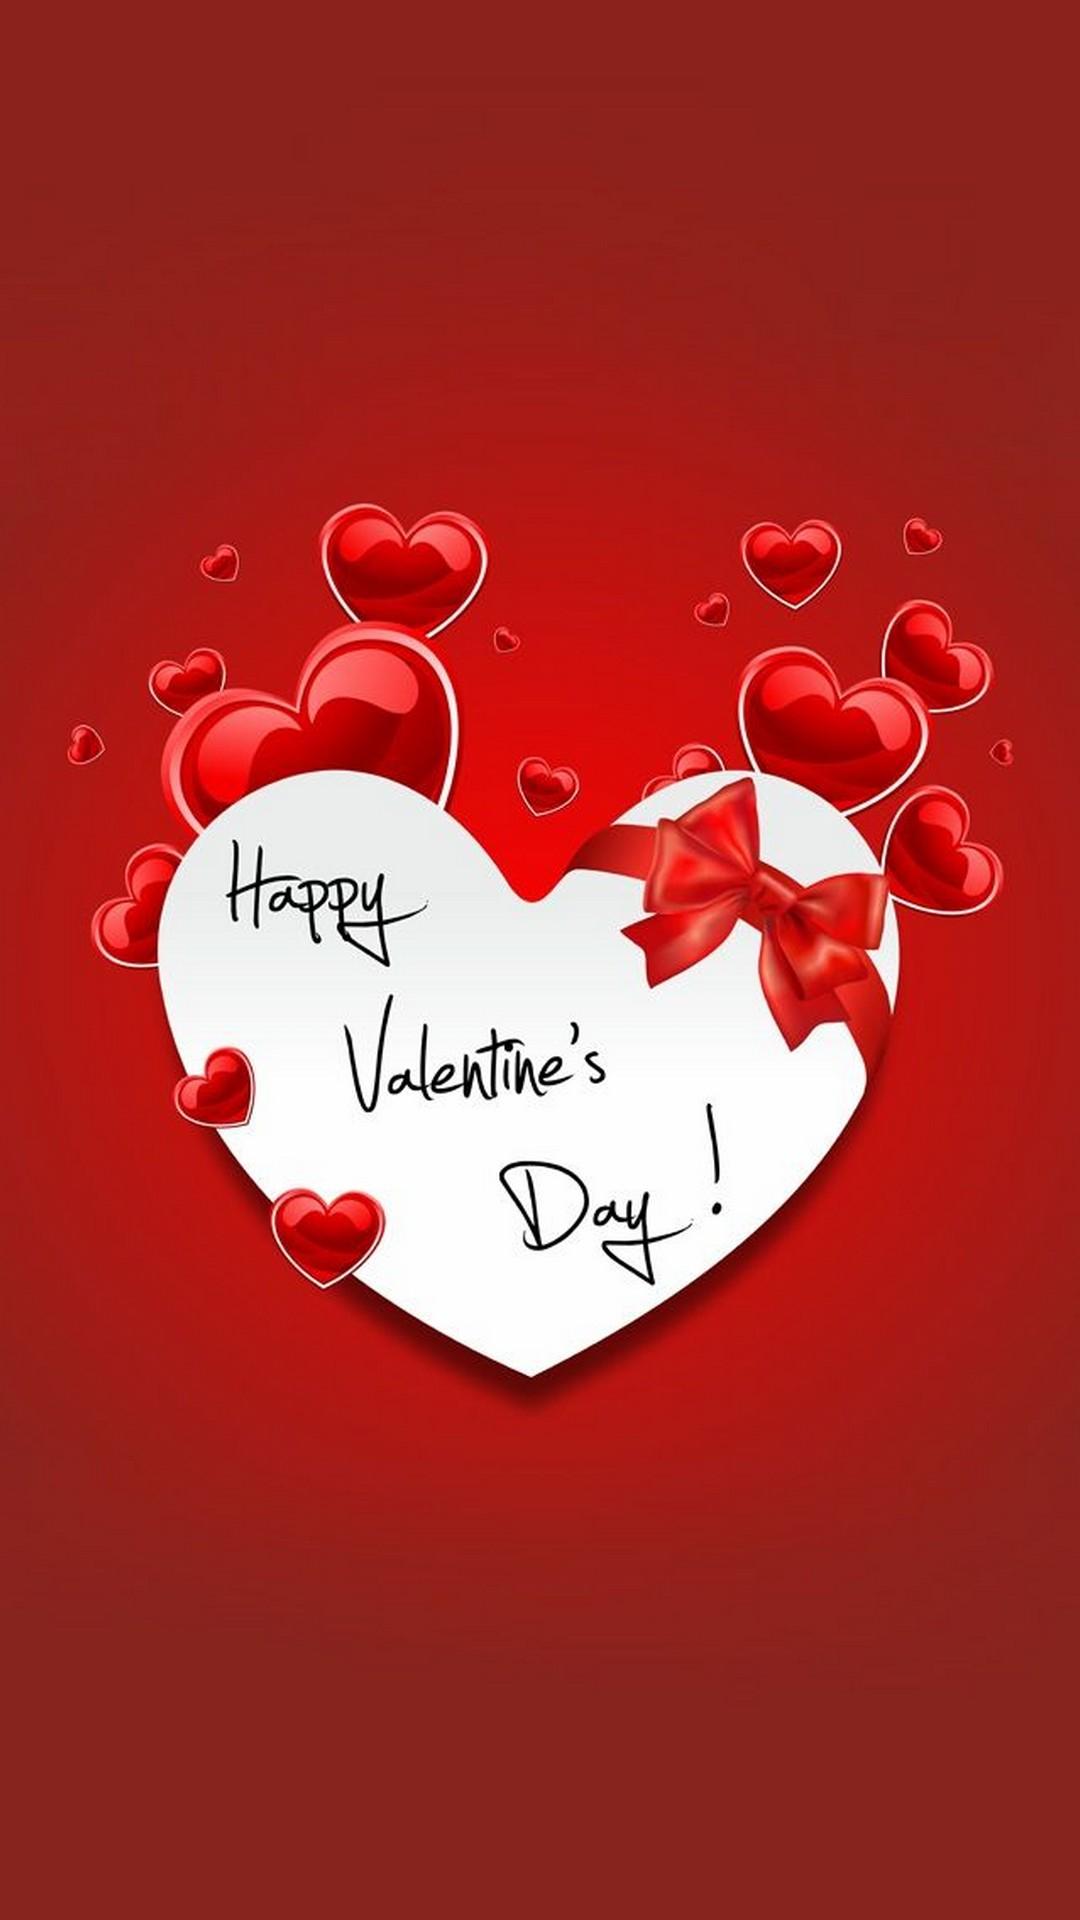 Free download Wallpaper Happy Valentines Day Image Android